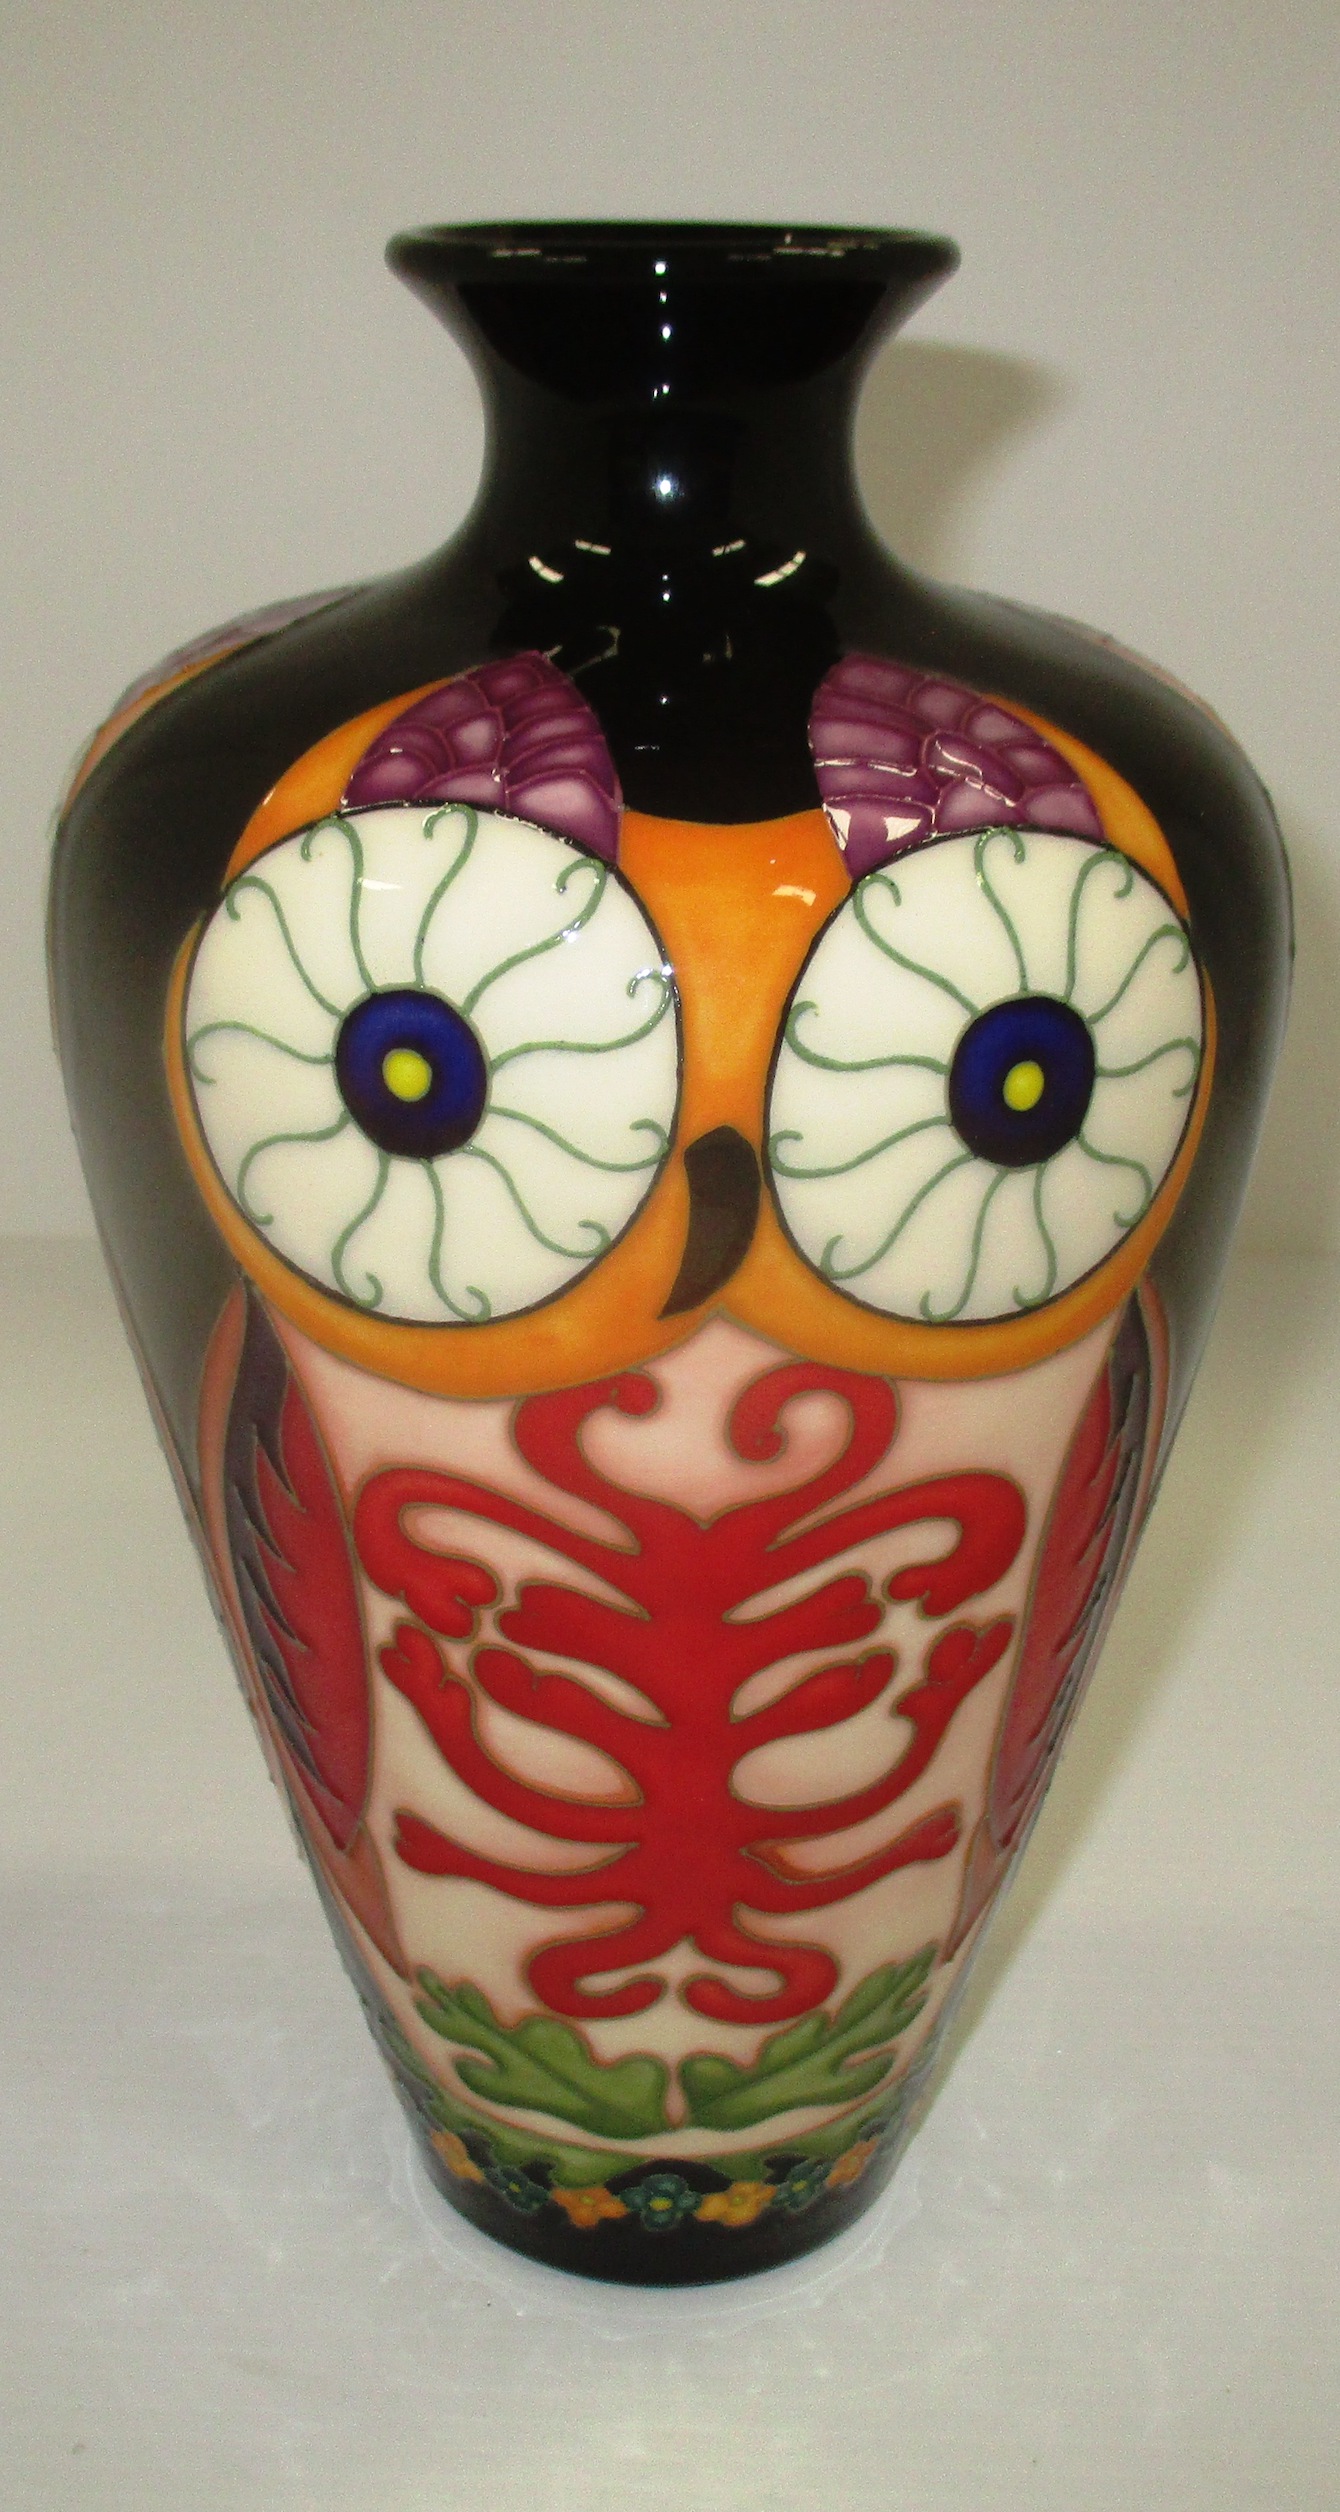 A Moorcroft baluster vase in "Wolly" pattern,